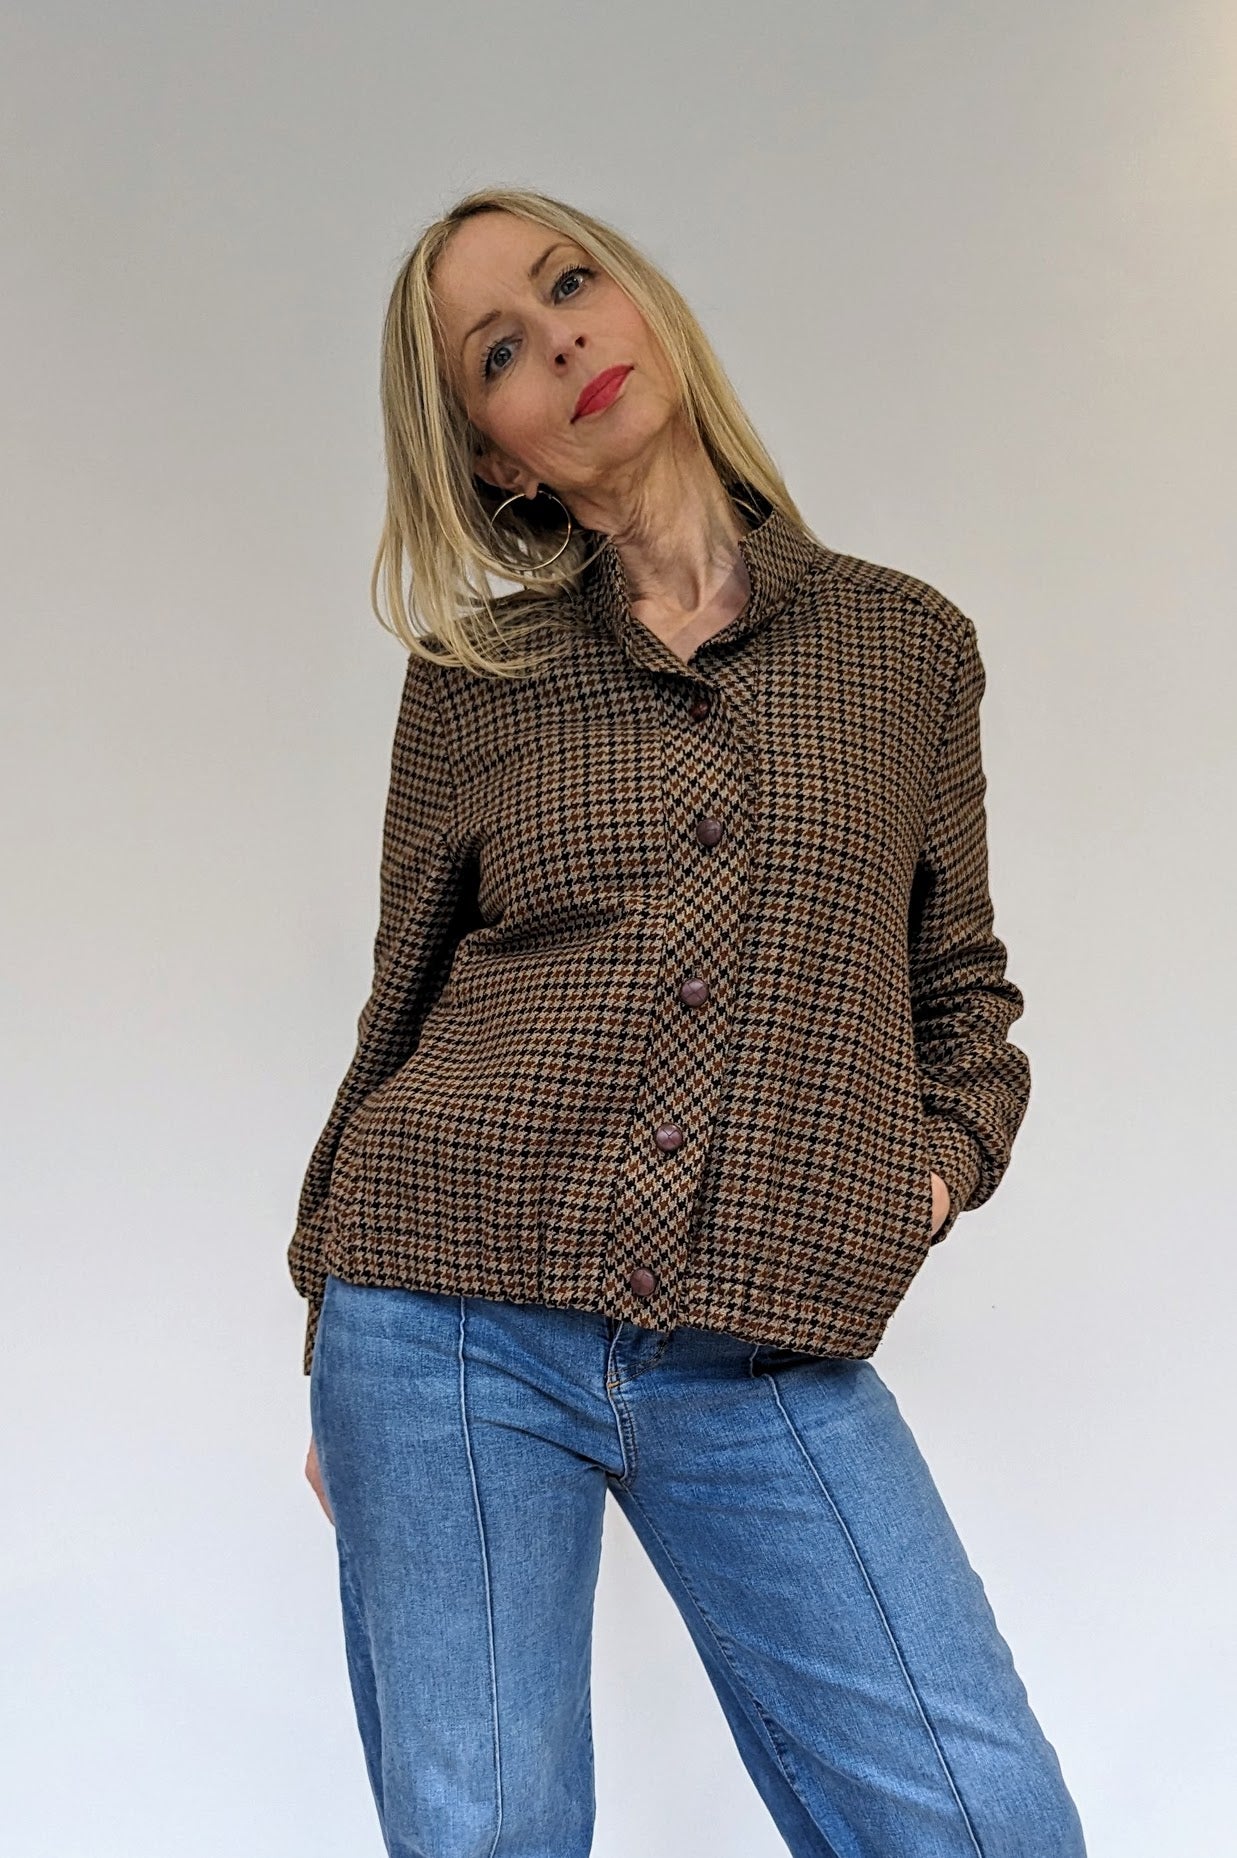 Brown Dogtooth Tweed Short Jacket with Buttons and Pockets Done Up